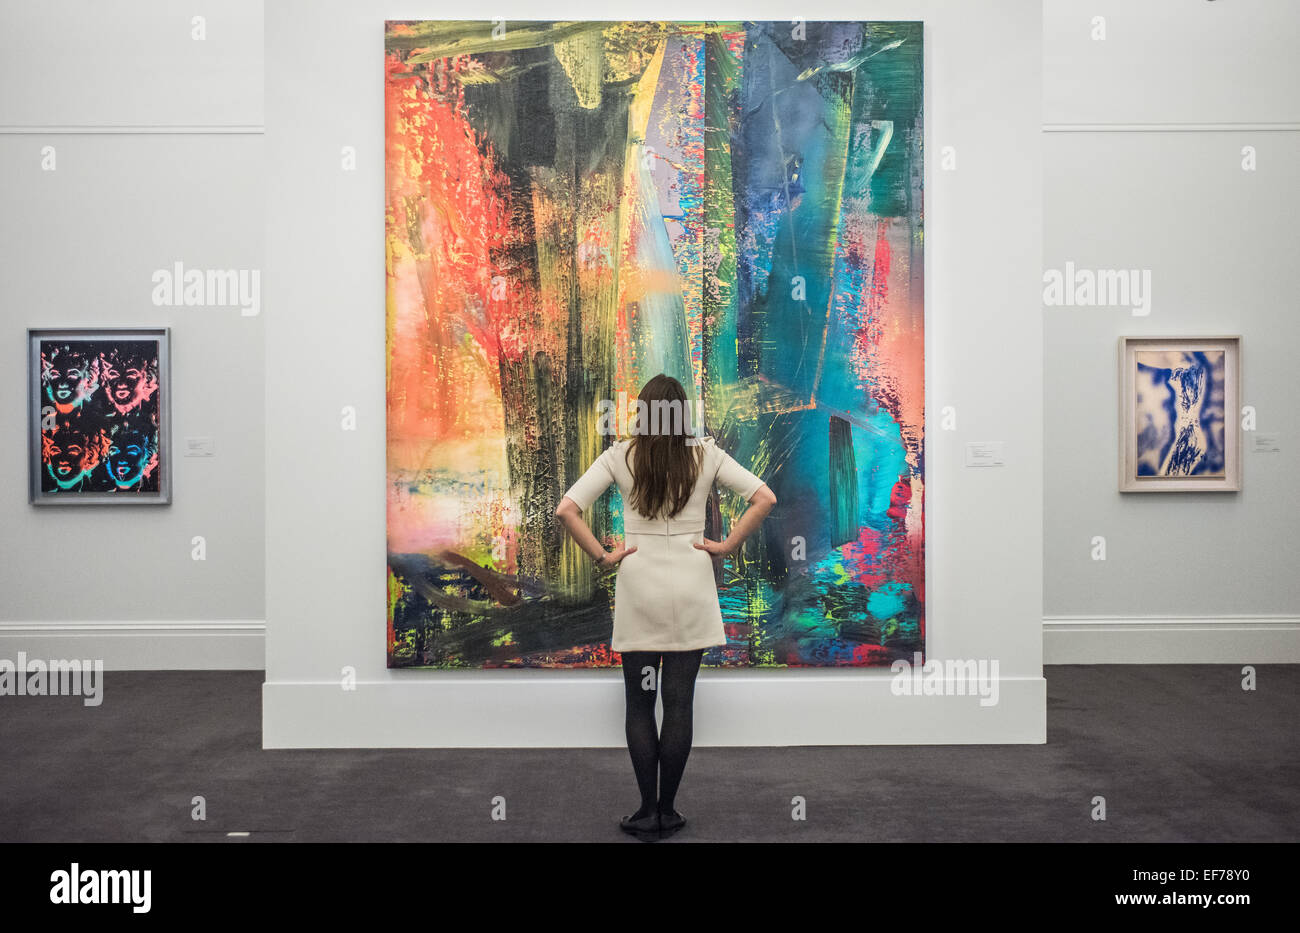 London, UK. 28th January, 2015. a Sotheby’s employee looks at ‘Abstraktes Bild’ by Gerhard Richter (est. £14-20m)  during the press view of the Impressionist & Modern, Surrealist and Contemporary Art sale together estimated at over £233 million Credit:  Piero Cruciatti/Alamy Live News Stock Photo